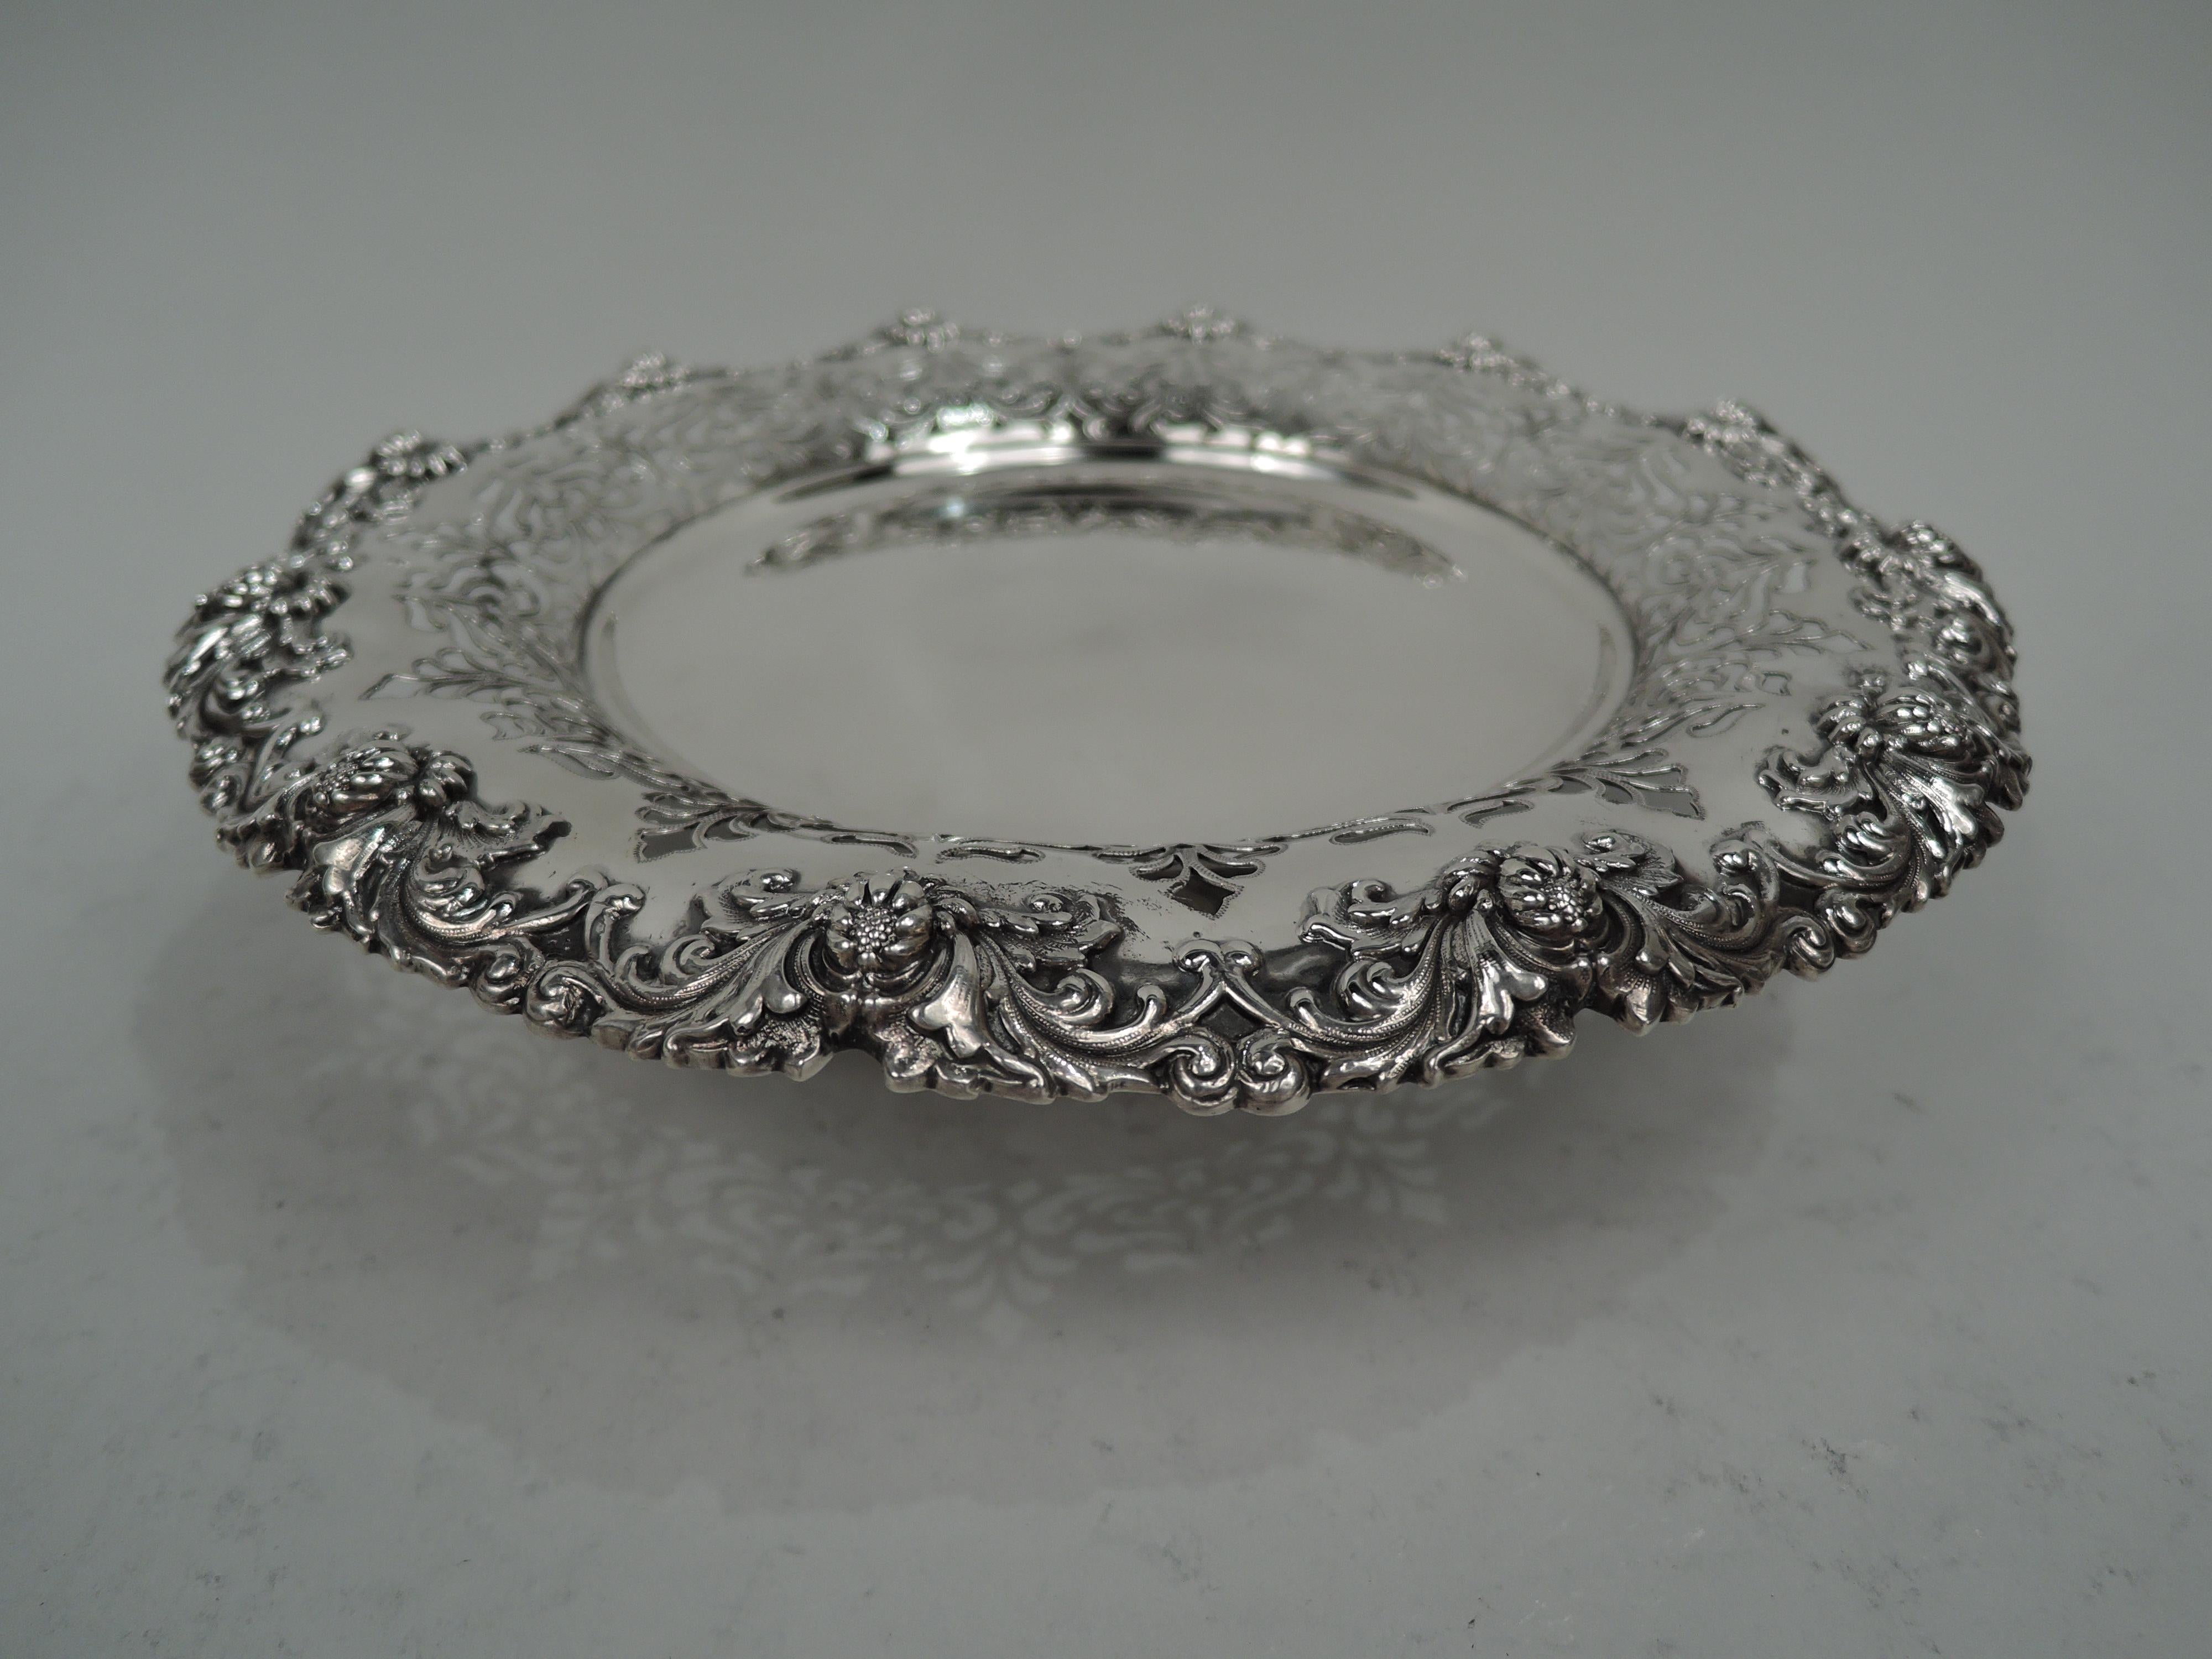 Pair of Victorian Classical sterling silver compotes. Made by Tiffany & Co. in New York. Each: Round solid well and concave sides with pierced leafing scrollwork; raised foot. Rims have applied leafing scrollwork and buds that suggest the influence